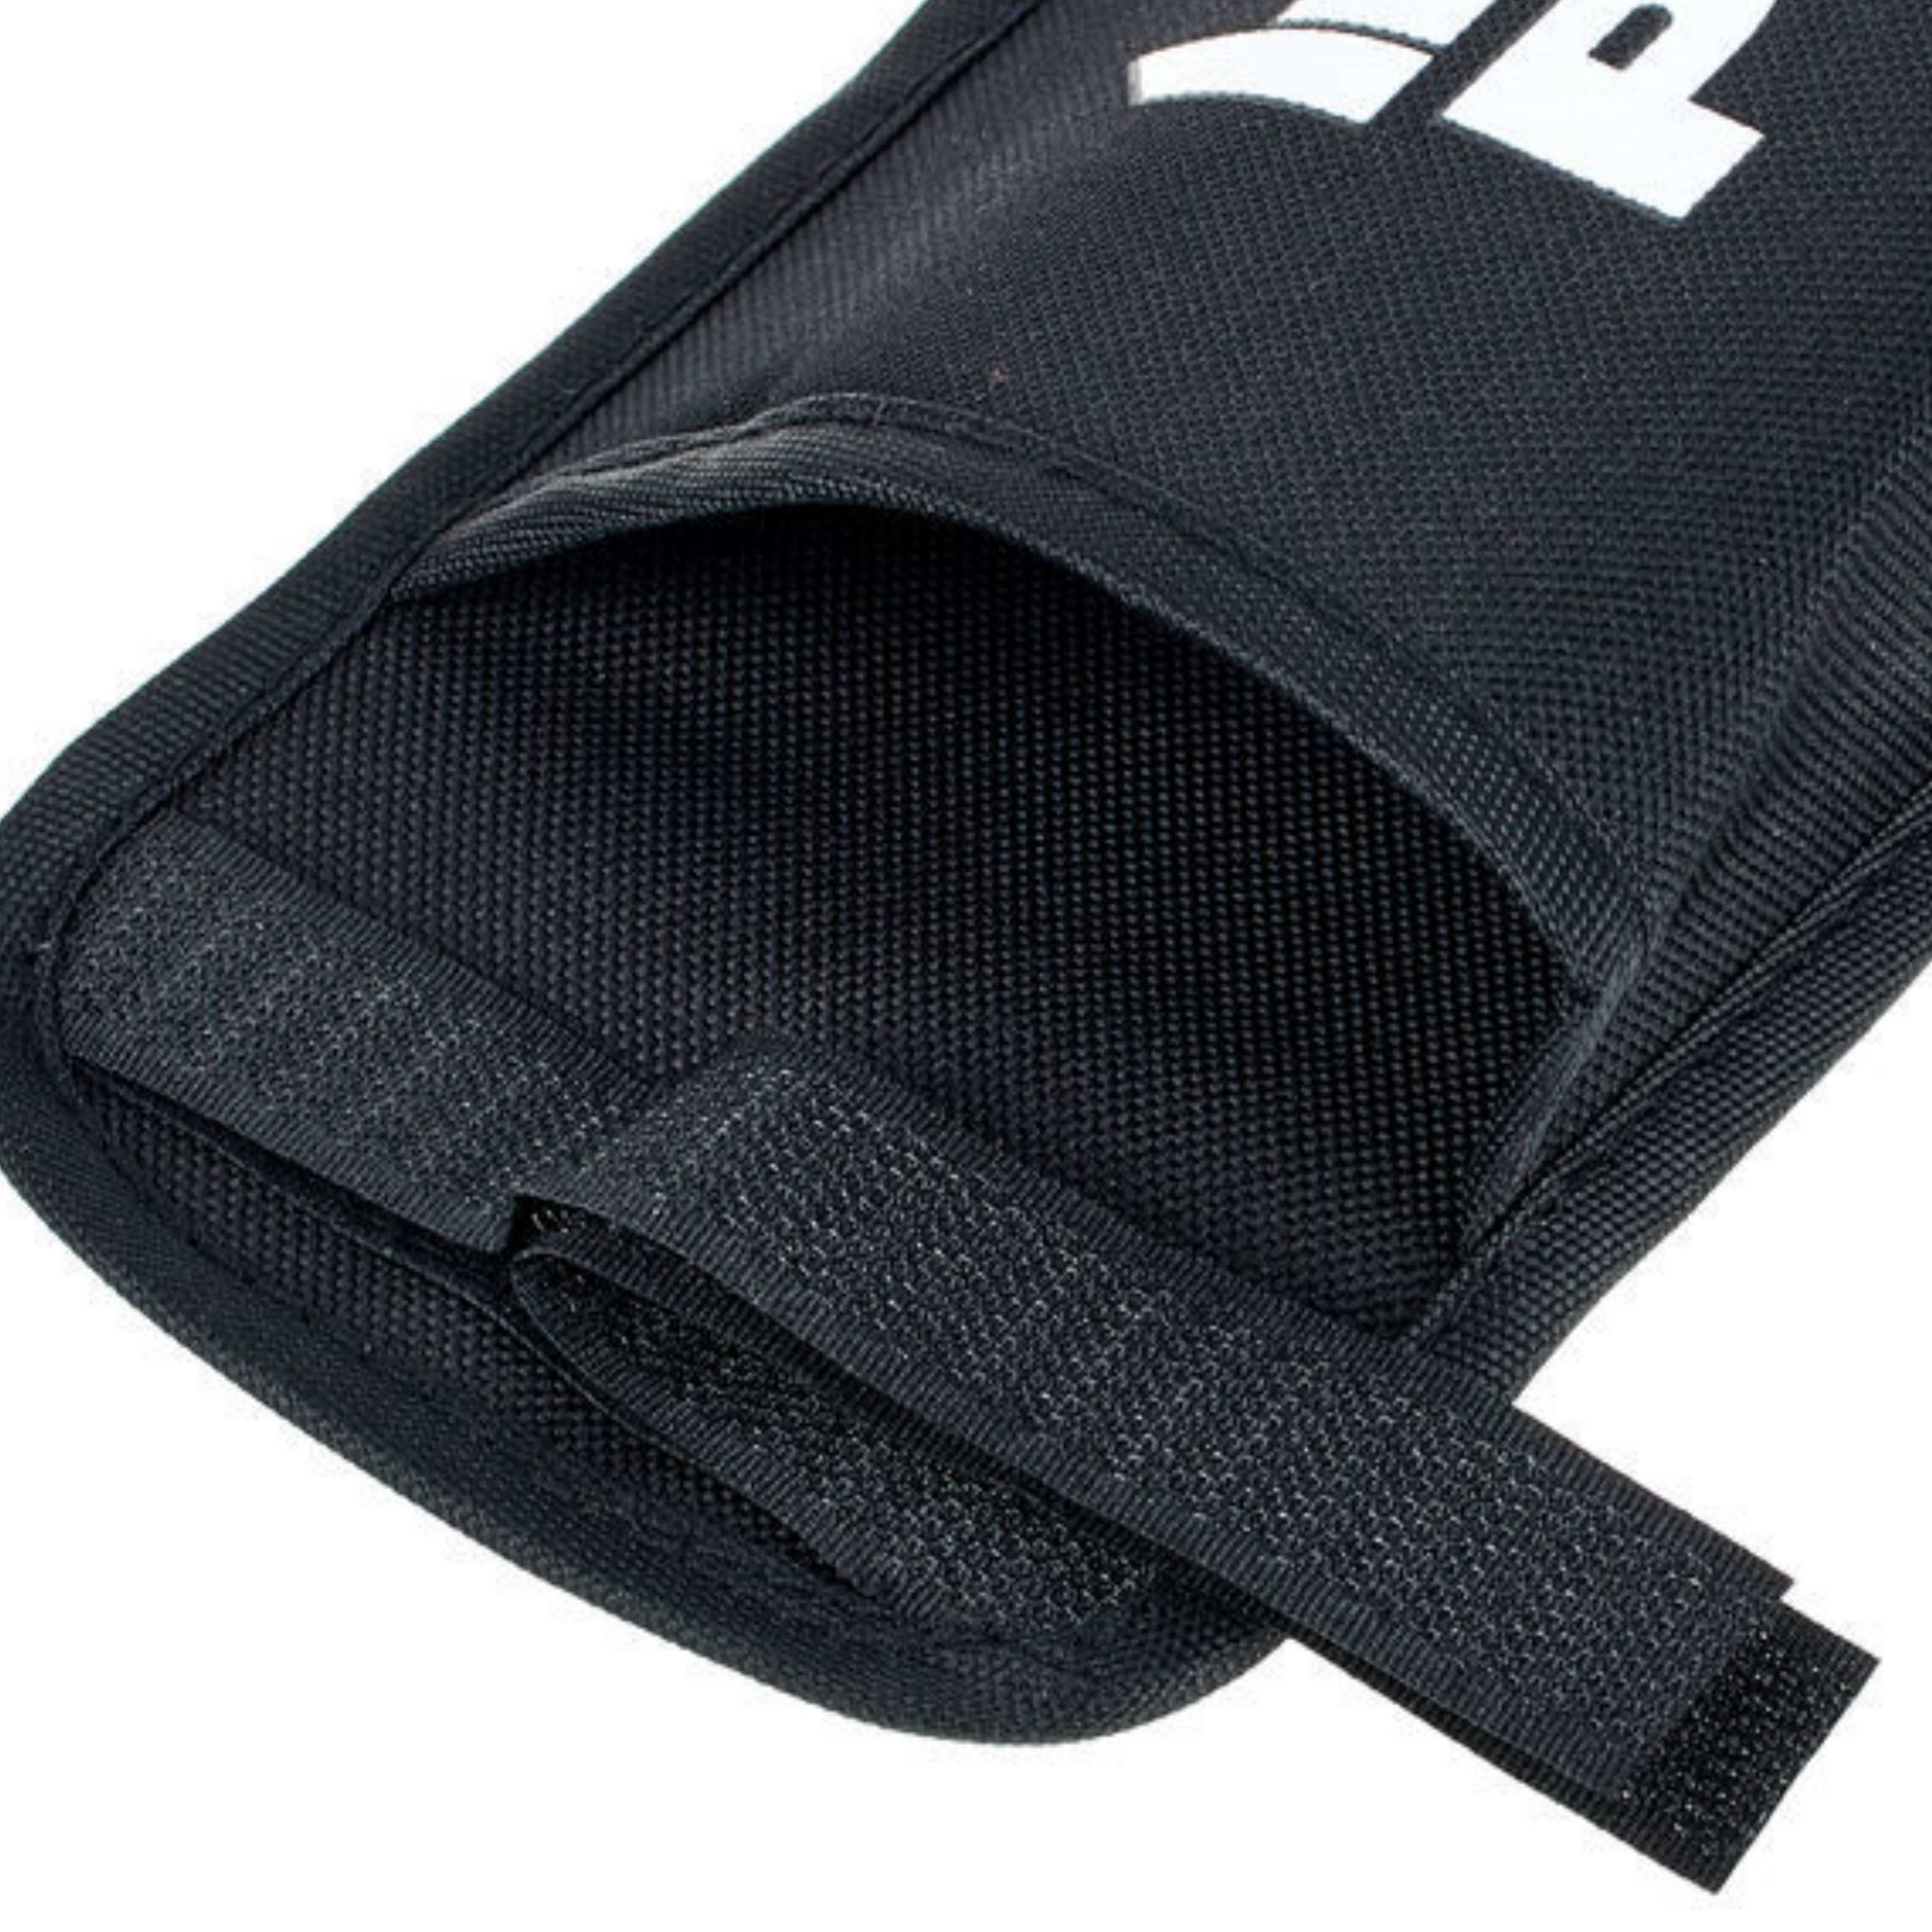 Innovative Percussion SB-2 Marching Drumstick Bag for 2 pair